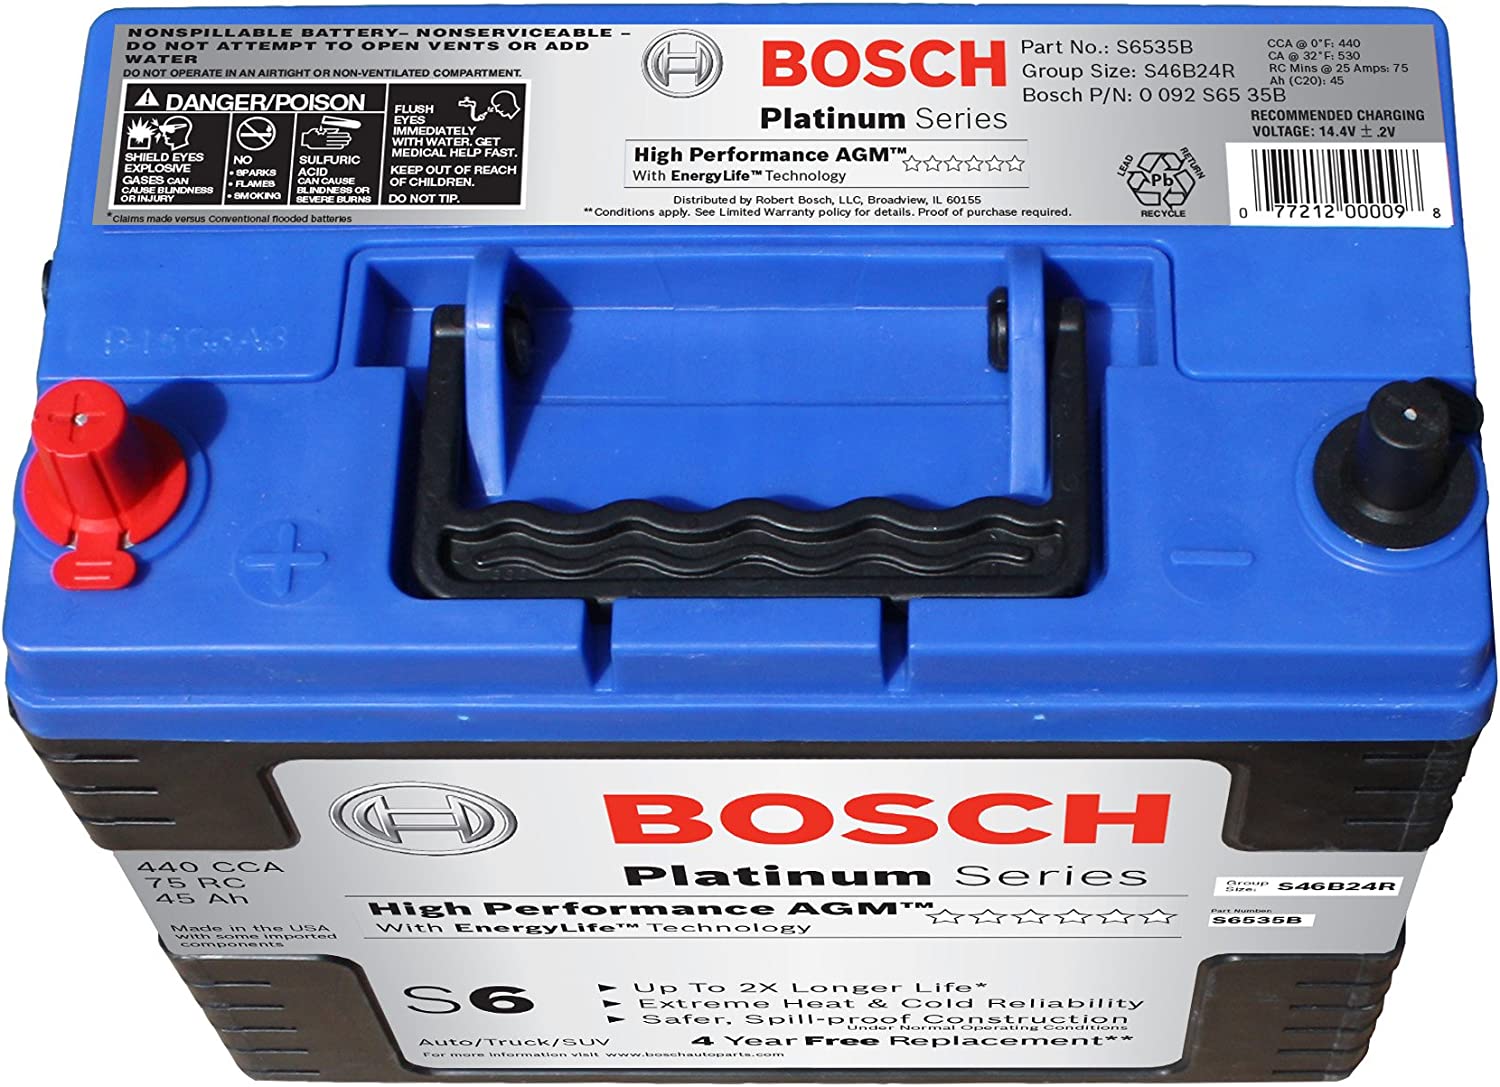 Bosch S6535B S6 Flat Plate AGM Battery - image 3 of 4